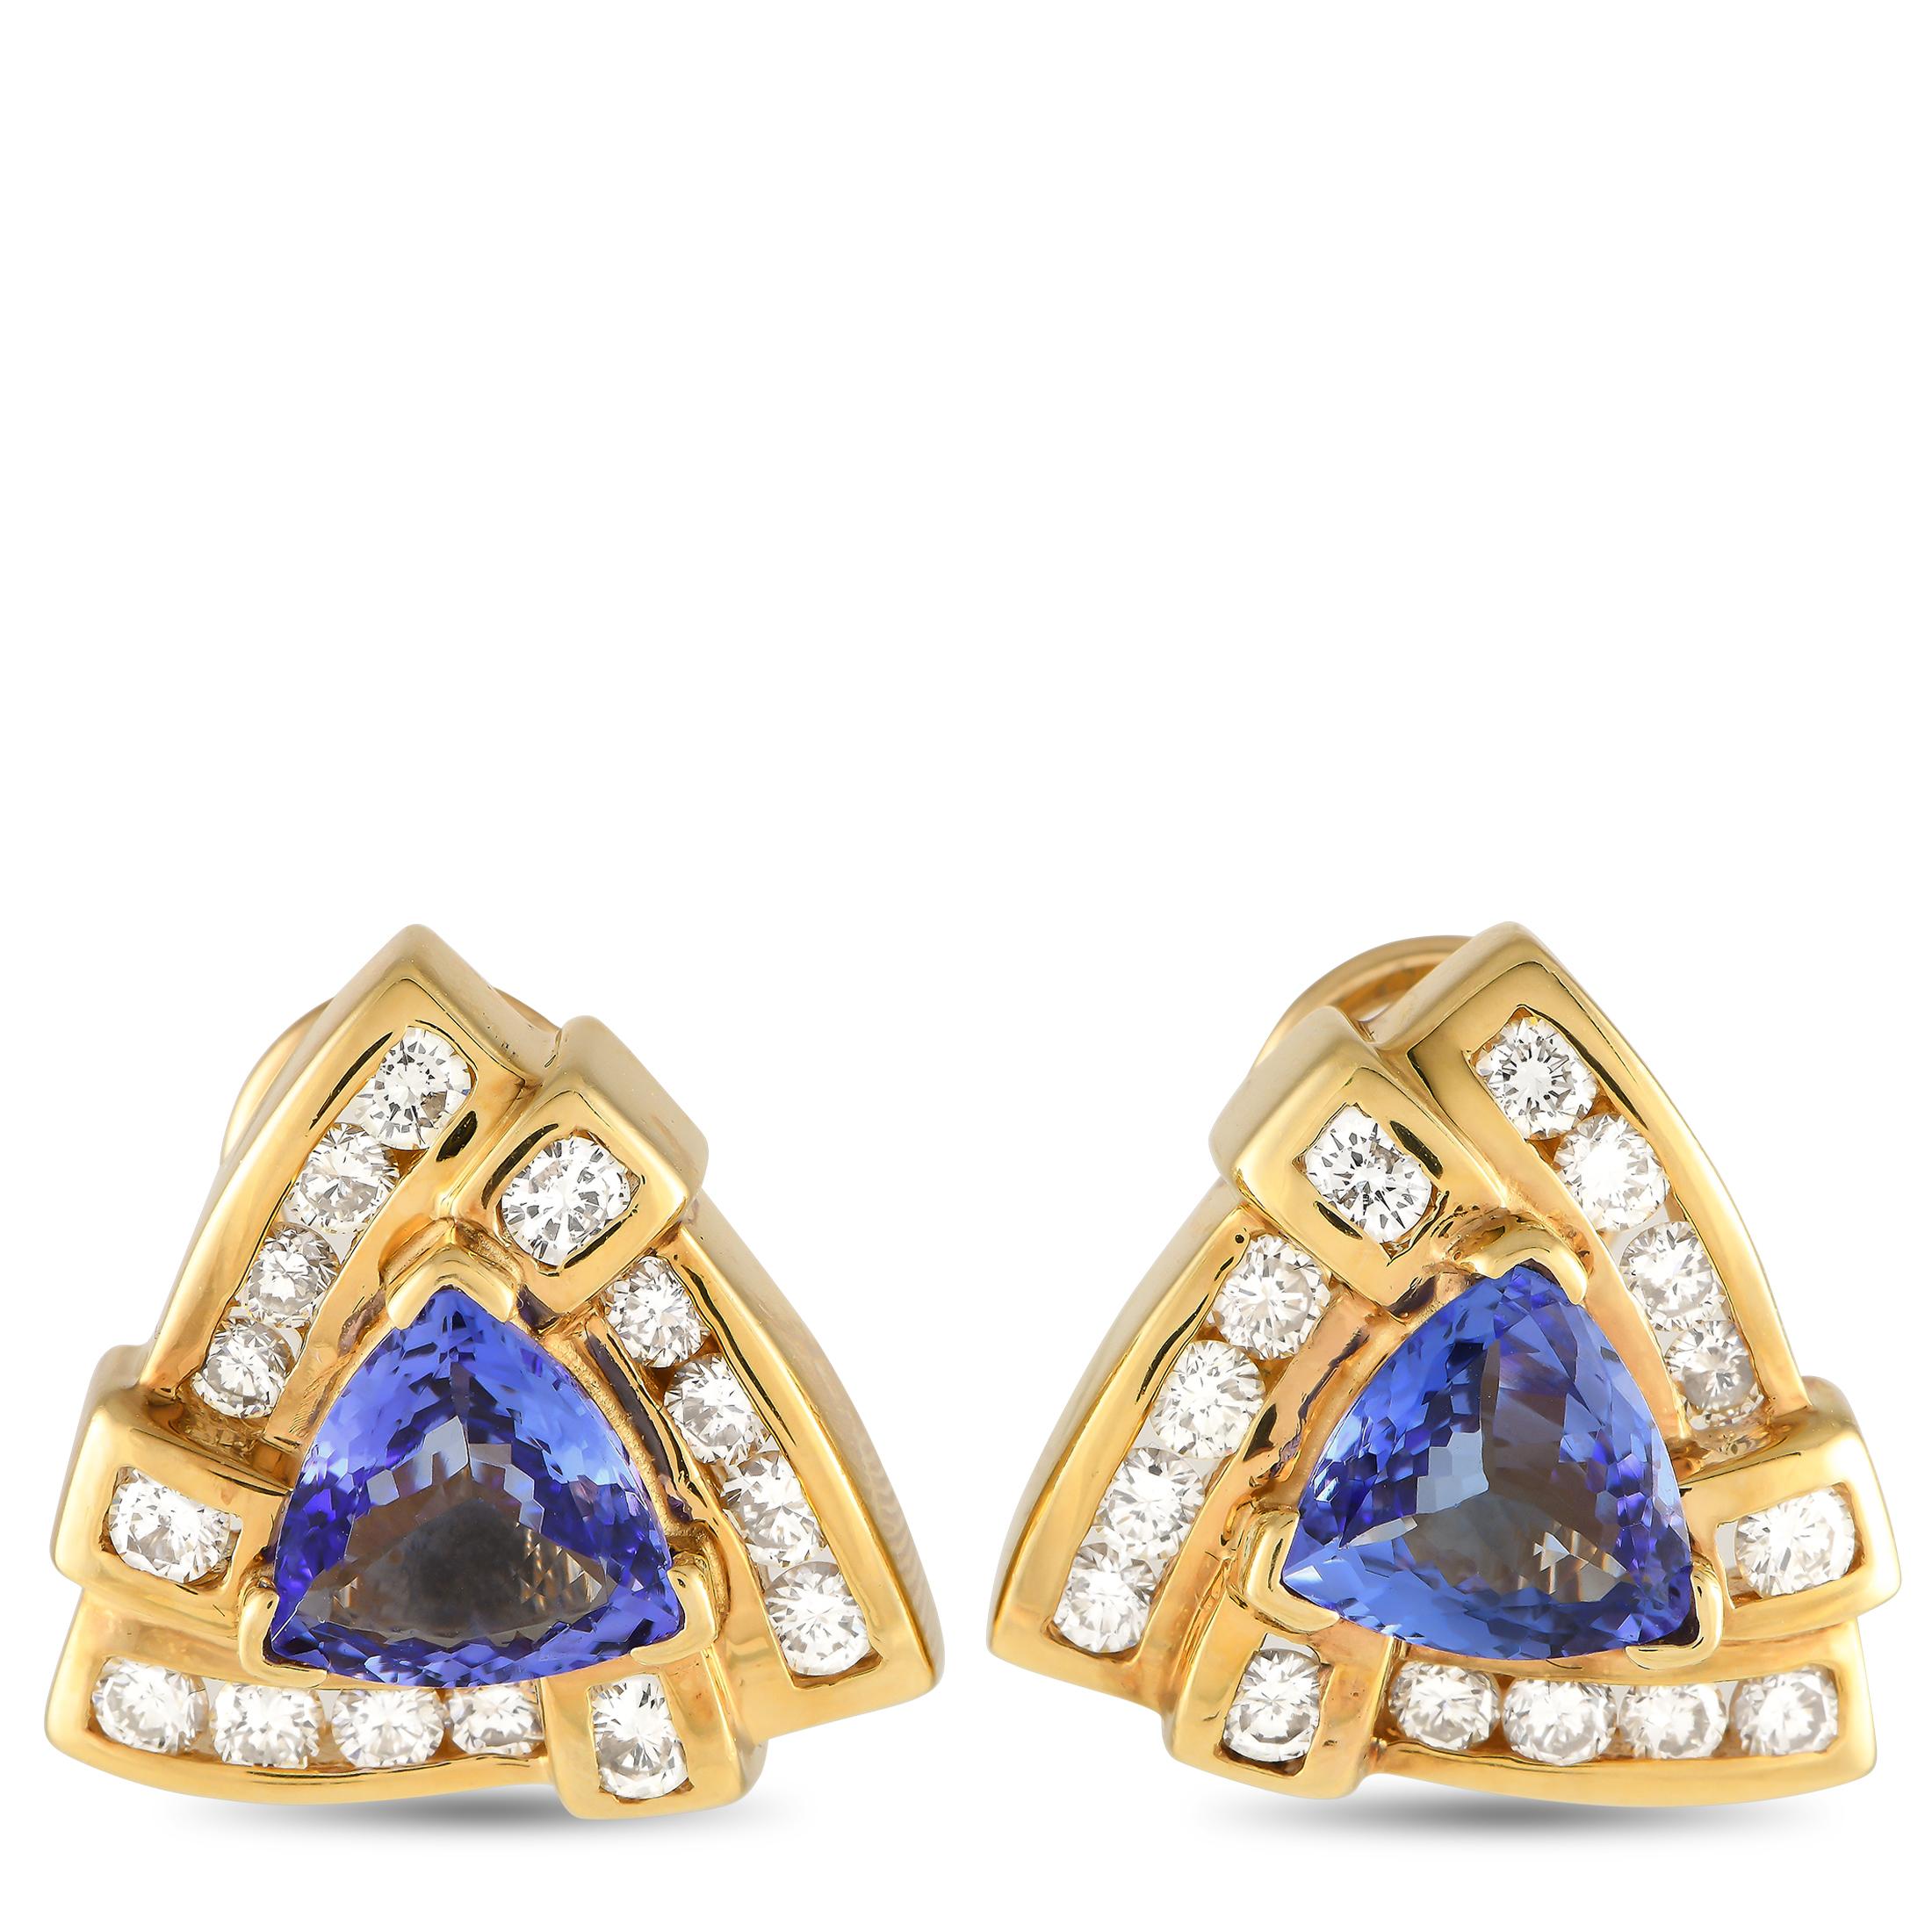 14K Yellow Gold Diamond and Tanzanite Earrings MF06-012424 In Excellent Condition For Sale In Southampton, PA